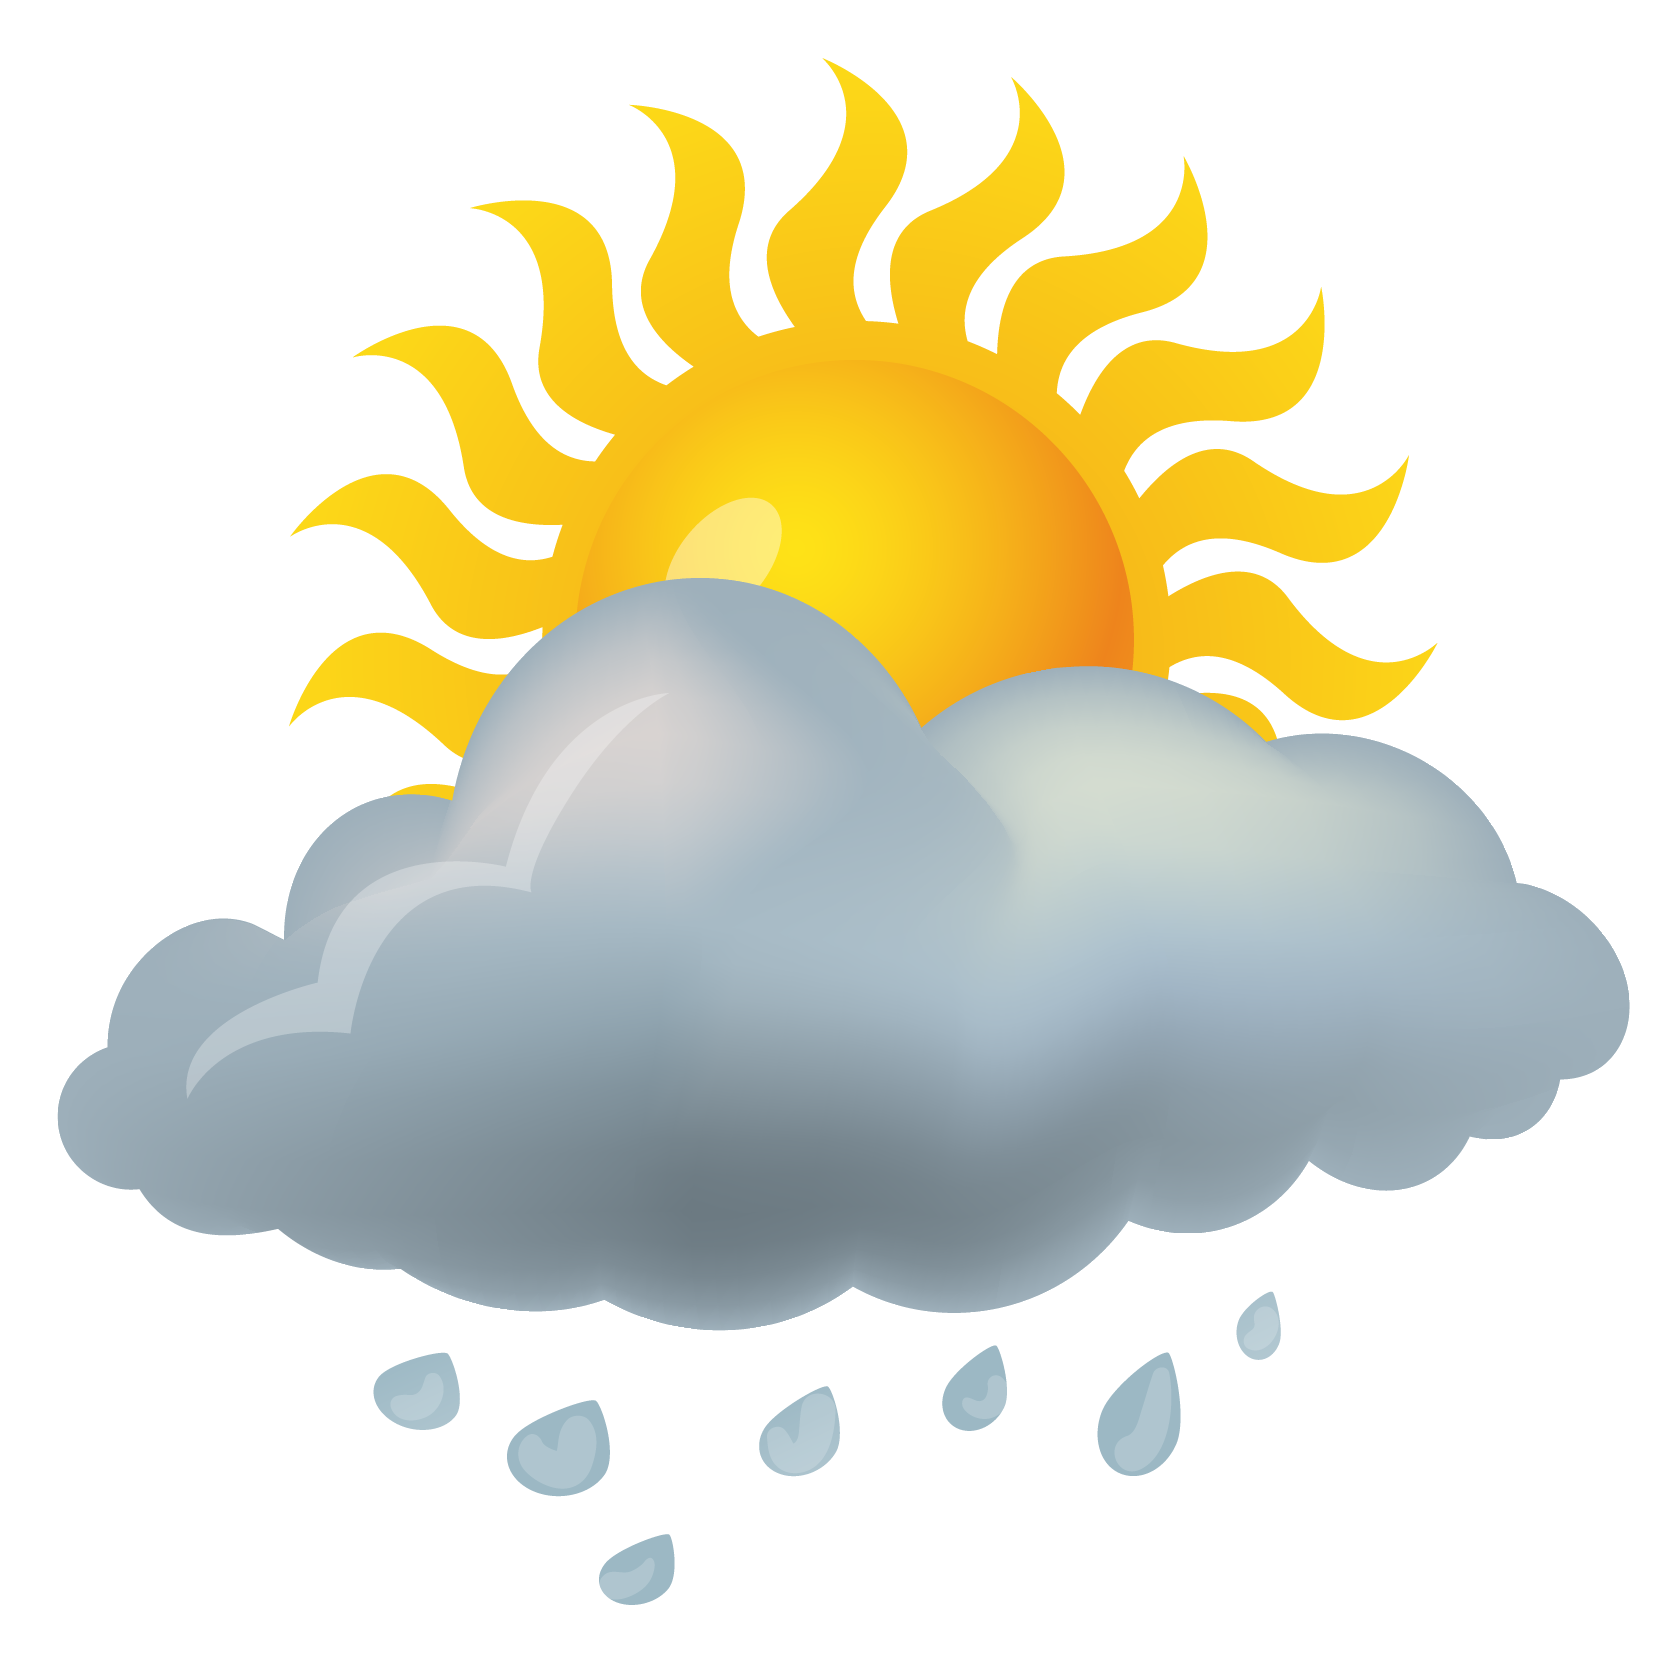 Download Forecasting Material Rain Shower Weather Icon HQ PNG Image ...